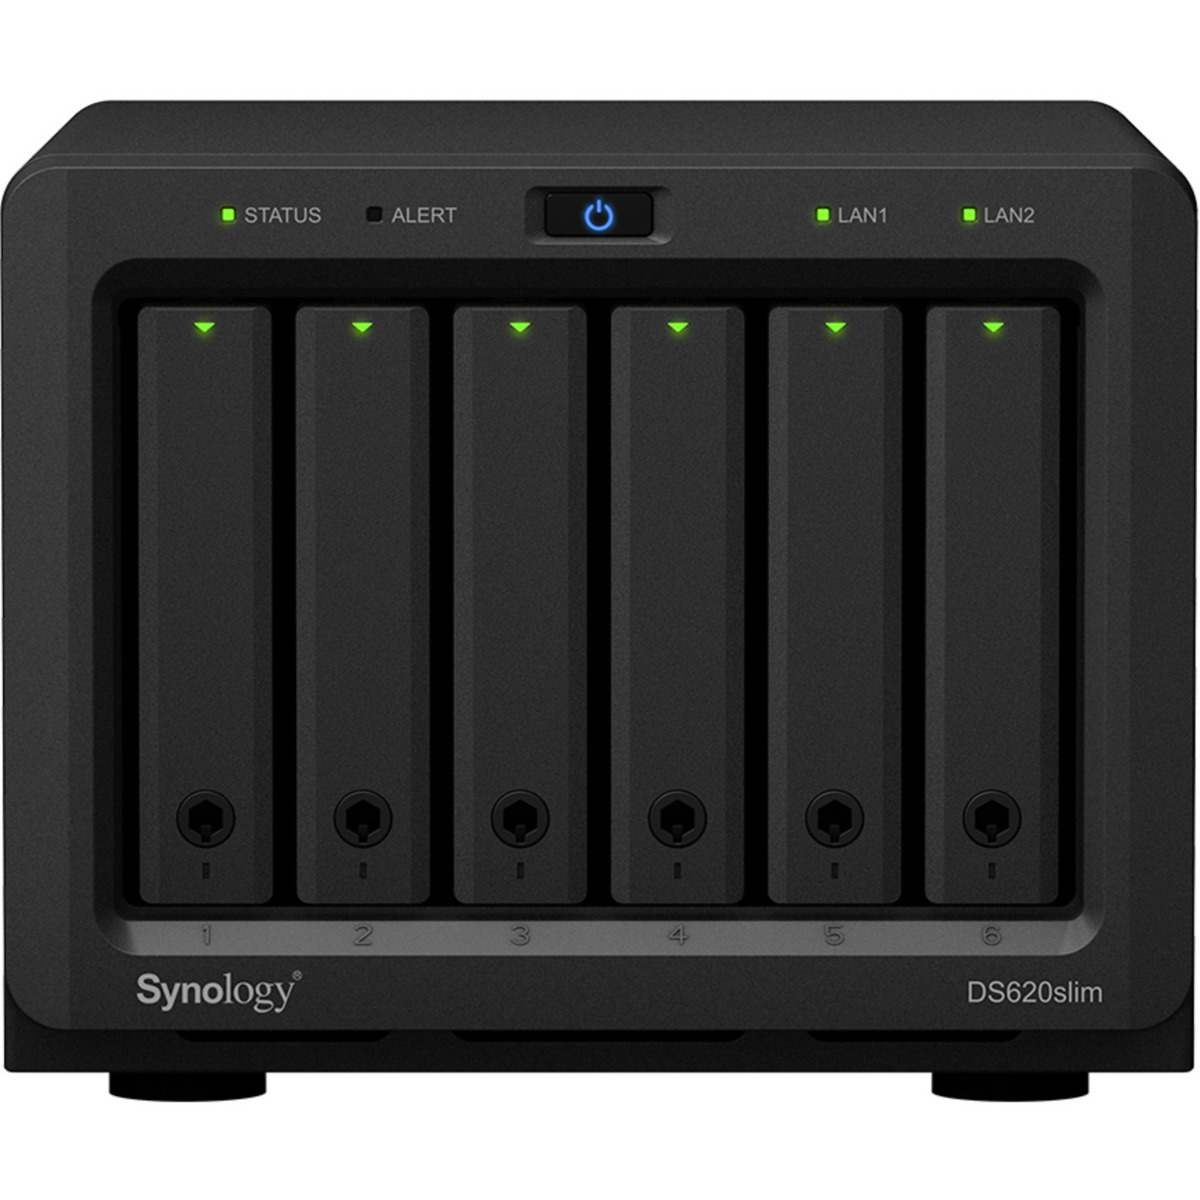 Synology DiskStation DS620slim 3tb 6-Bay Desktop Multimedia / Power User / Business NAS - Network Attached Storage Device 6x500gb Sandisk Ultra 3D SDSSDH3-500G 2.5 560/520MB/s SATA 6Gb/s SSD CONSUMER Class Drives Installed - Burn-In Tested - FREE RAM UPGRADE DiskStation DS620slim